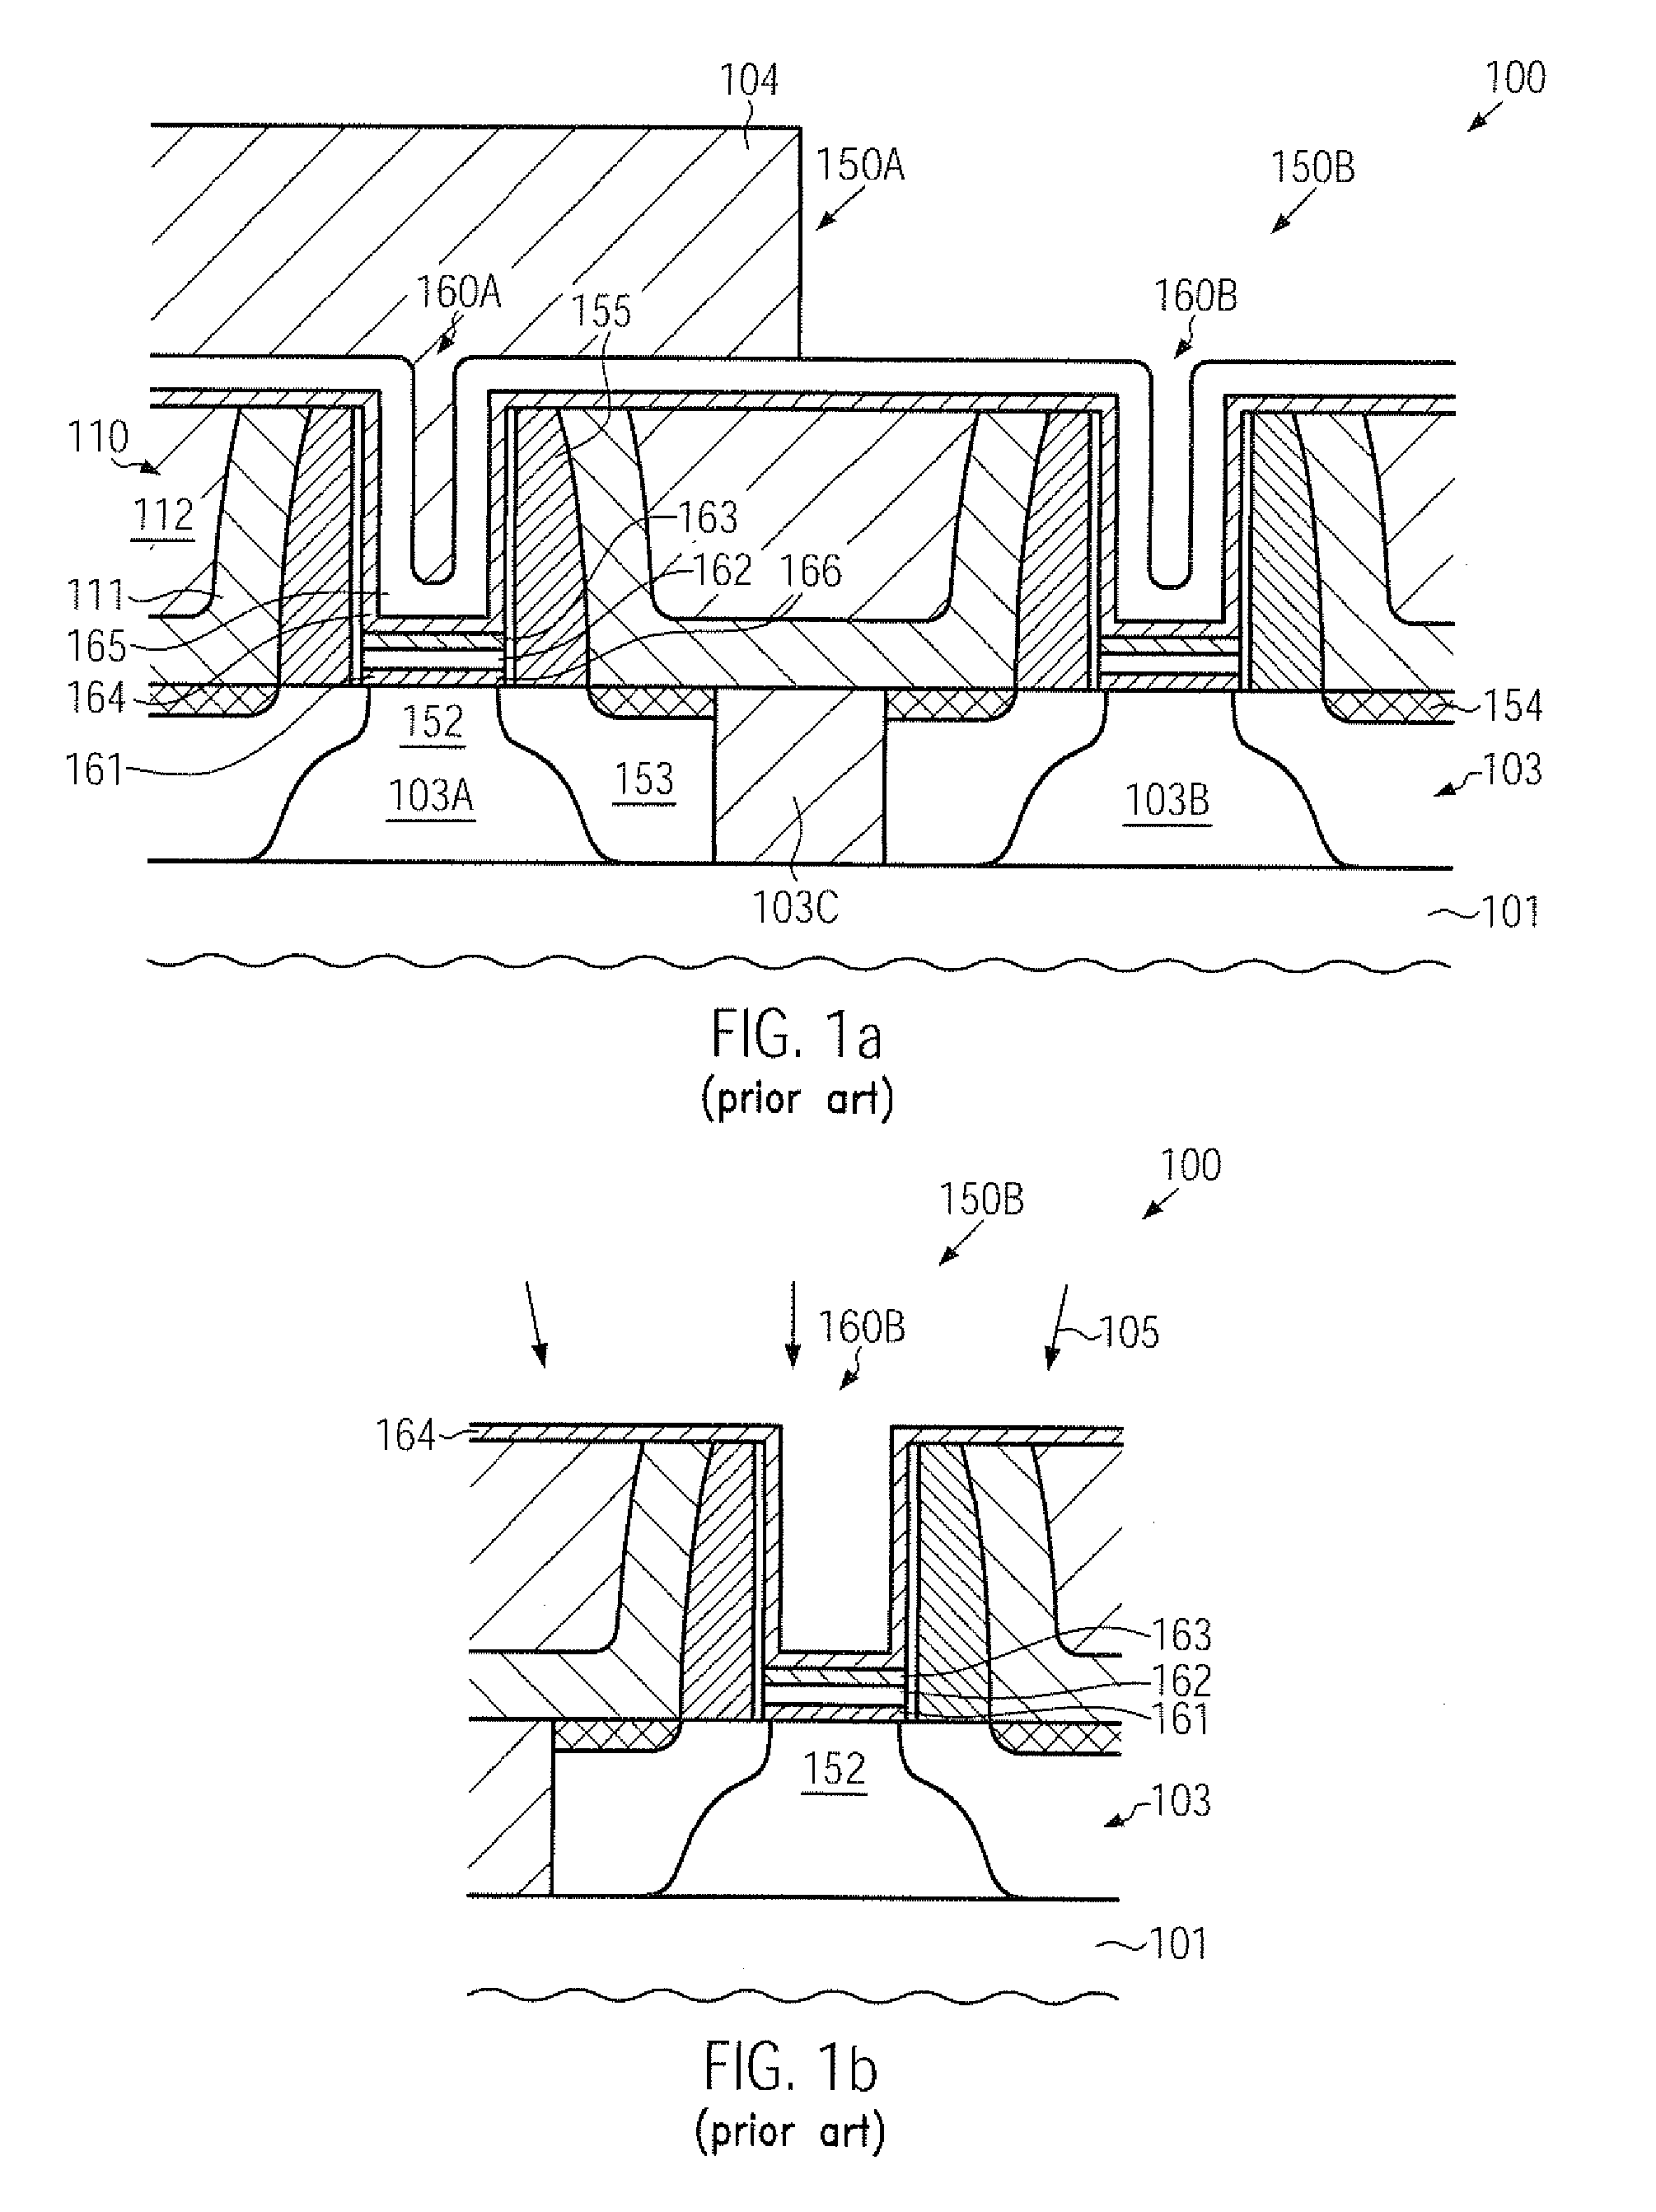 Work function adjustment in high-k metal gate electrode structures by selectively removing a barrier layer